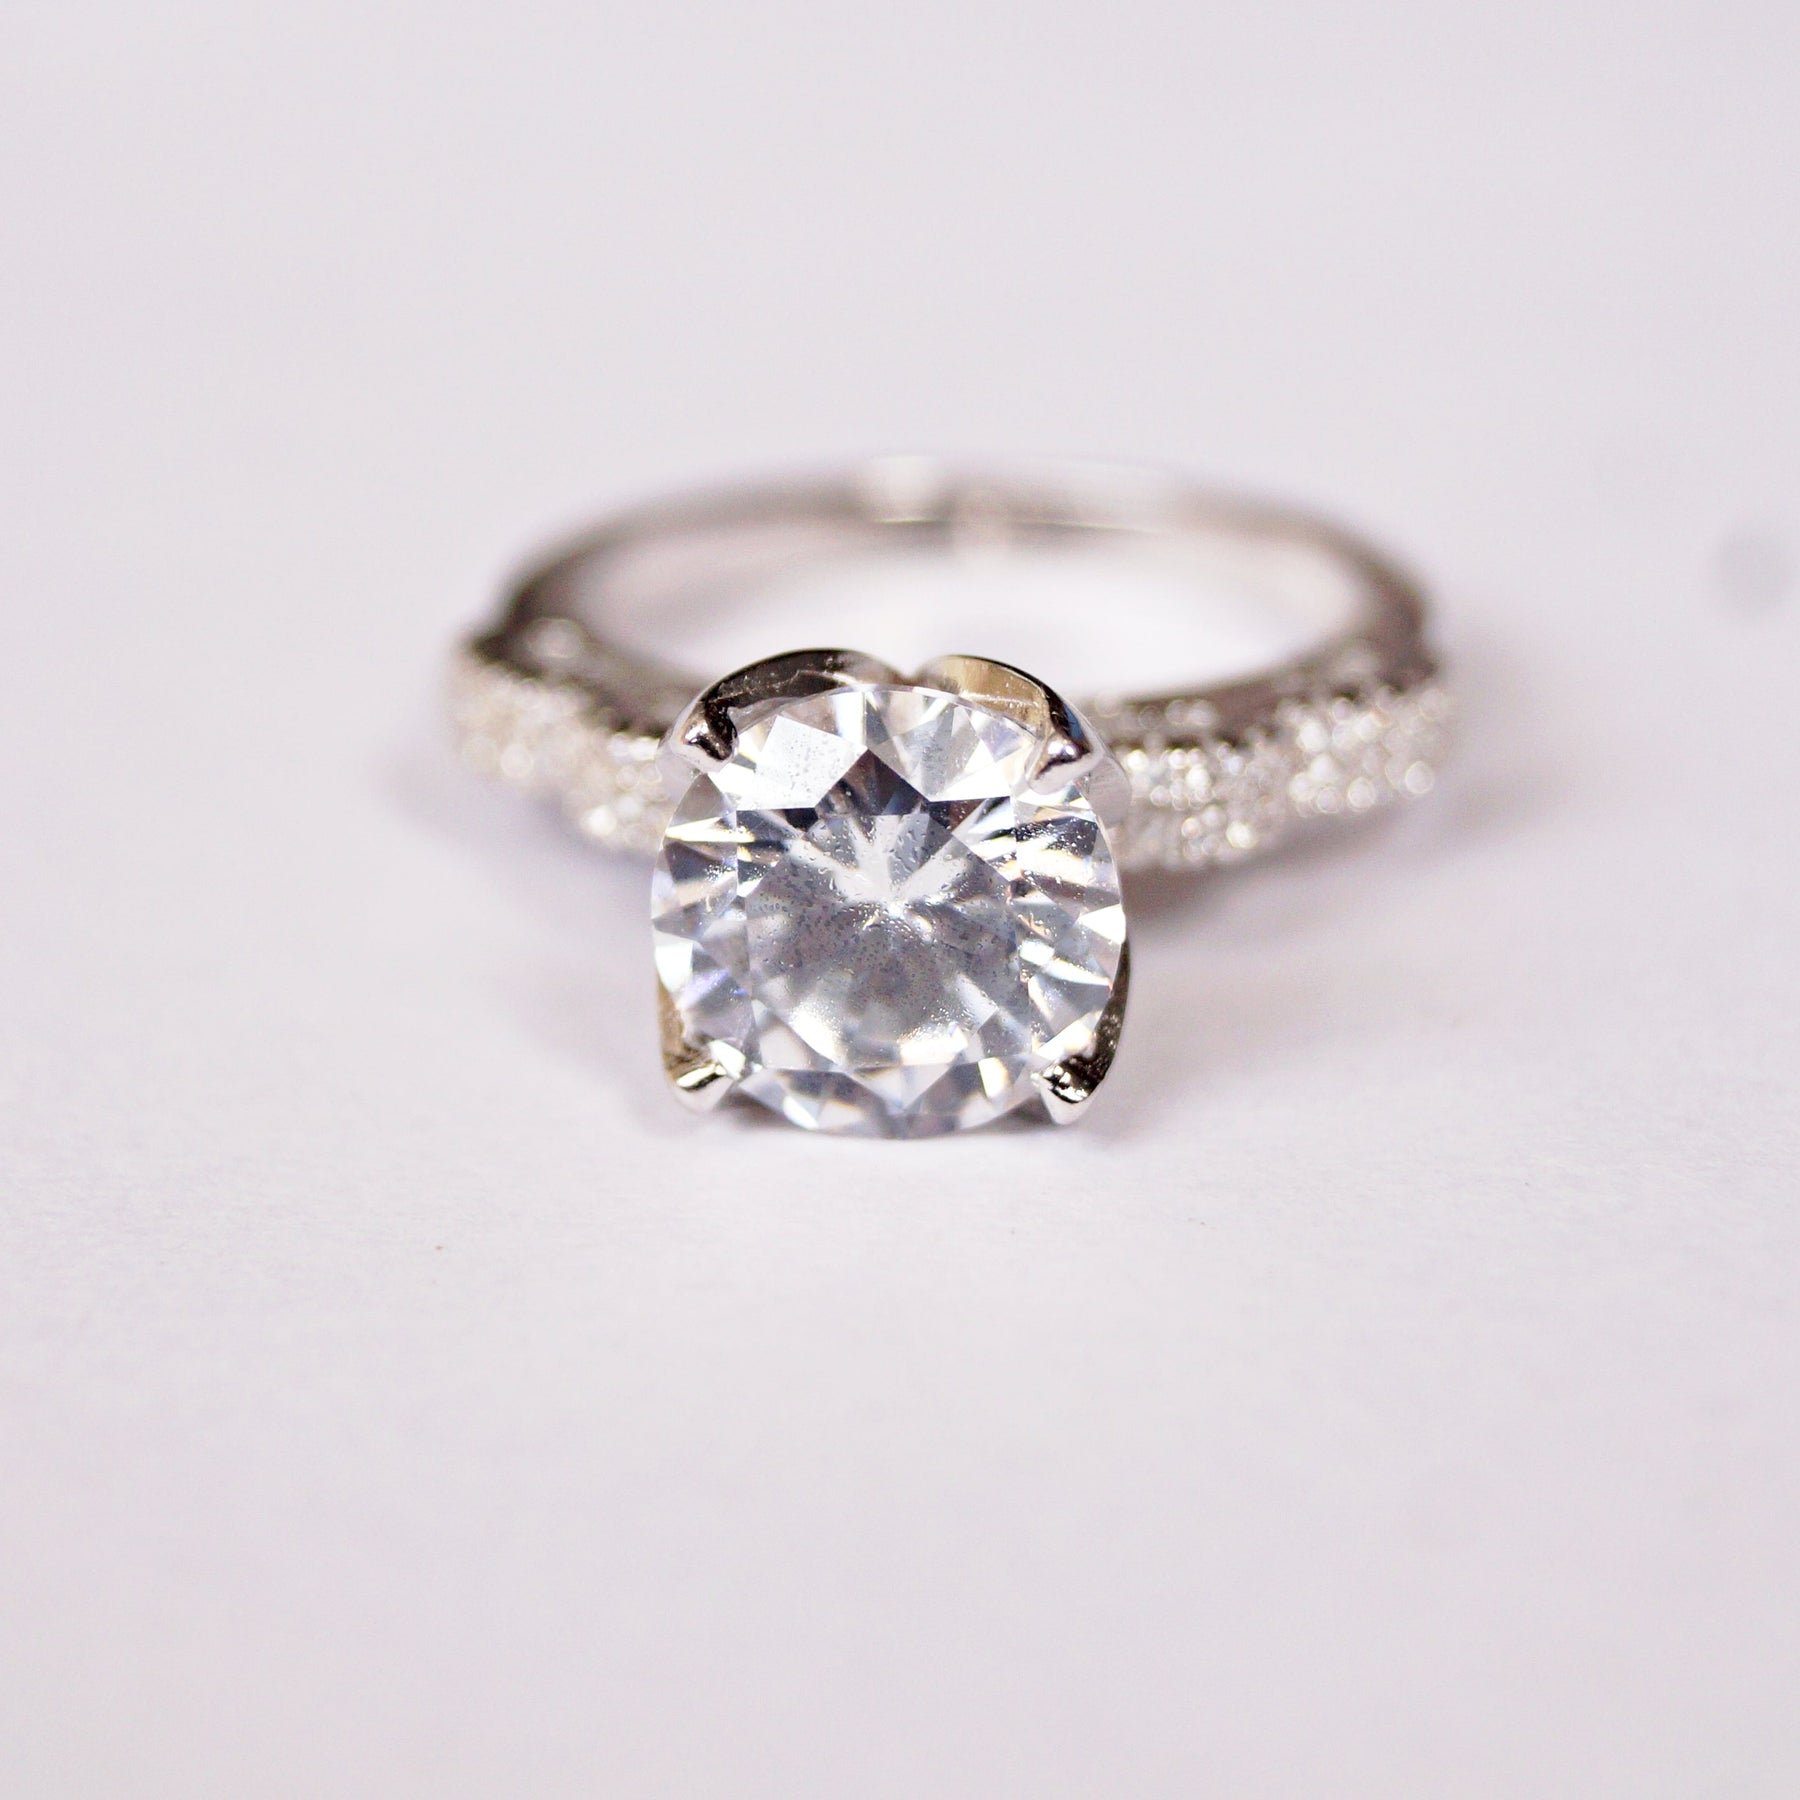 The Solitaire Flower Ring